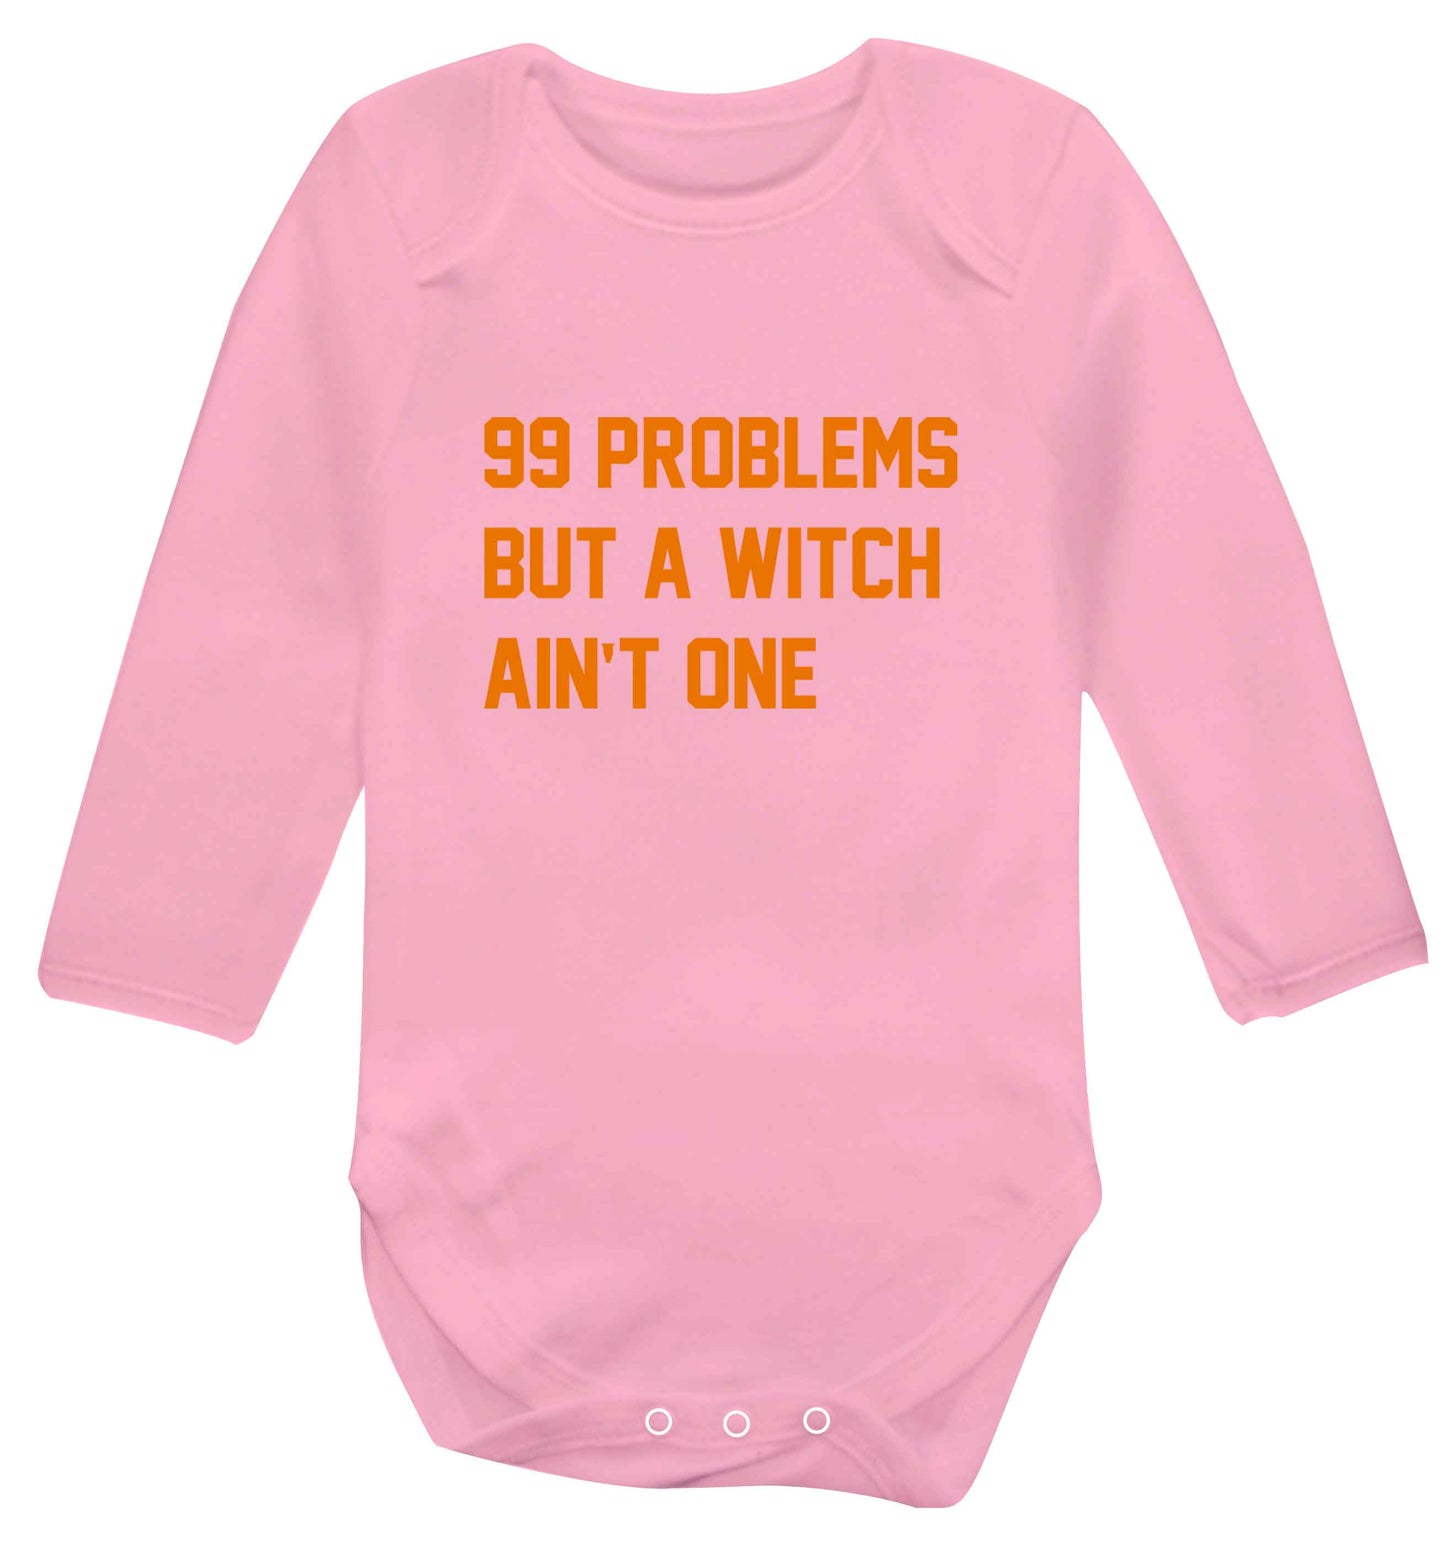 99 Problems but a witch aint one baby vest long sleeved pale pink 6-12 months